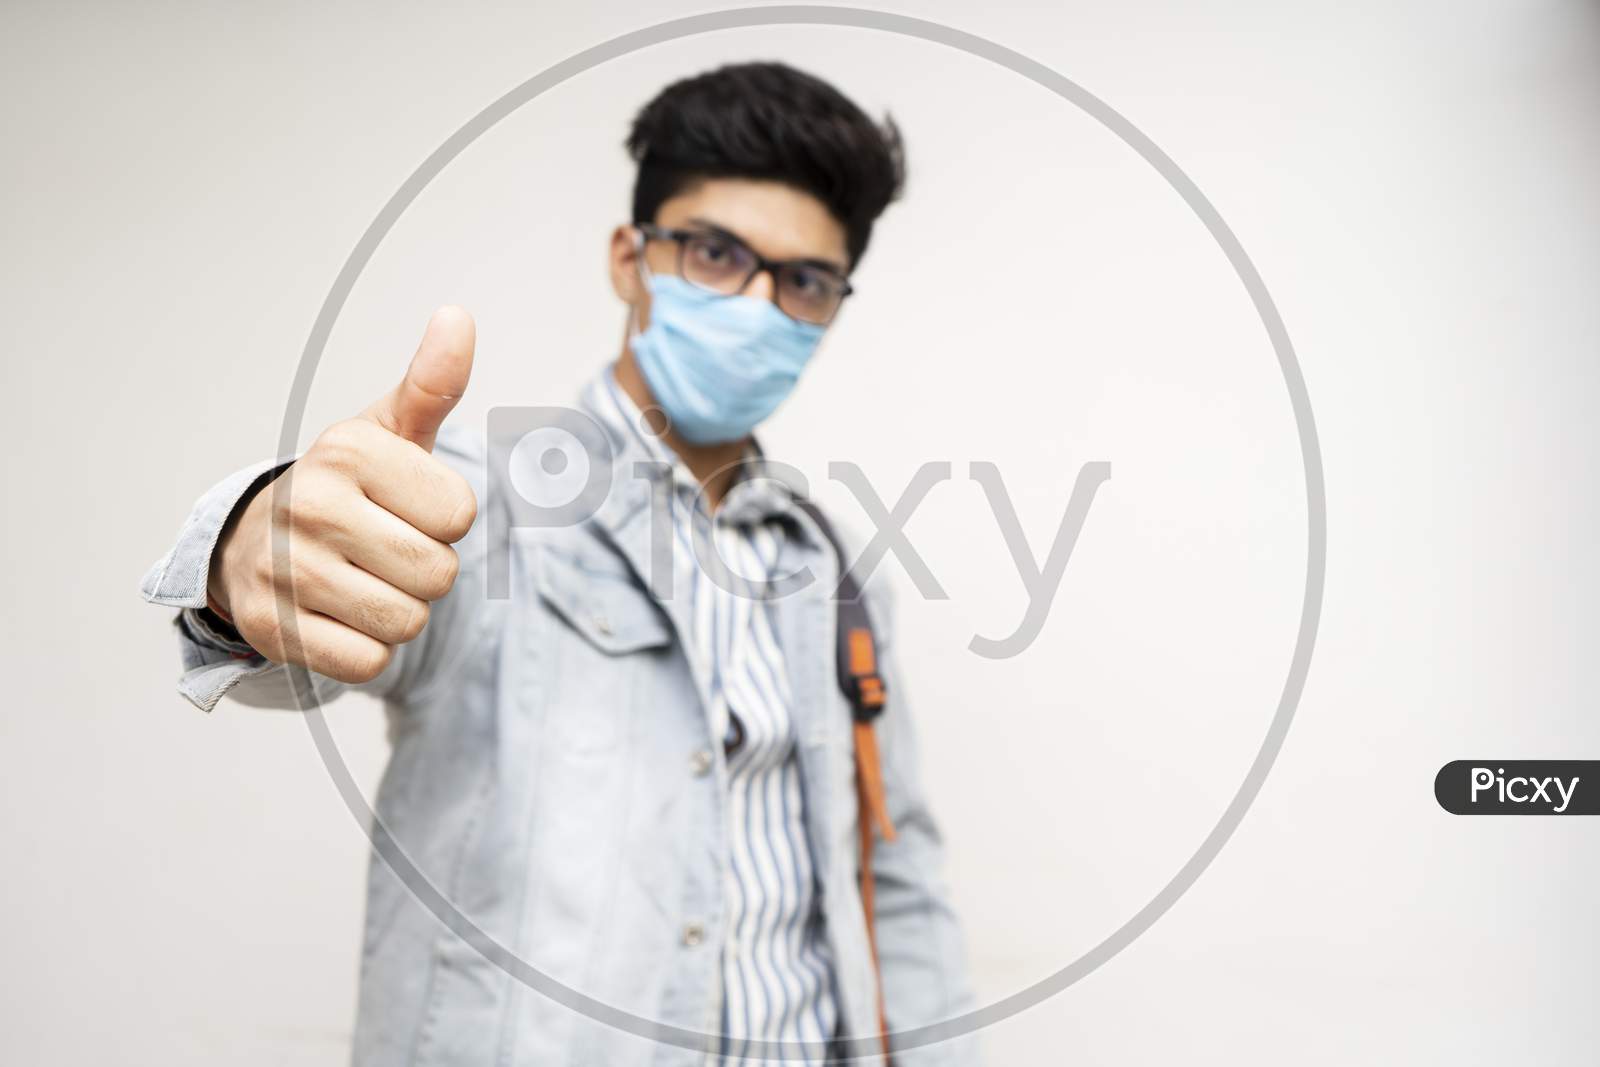 Young Handsome Asian College Student With Bag And Wearing Mask Showing Thumbs Up In The Camera.